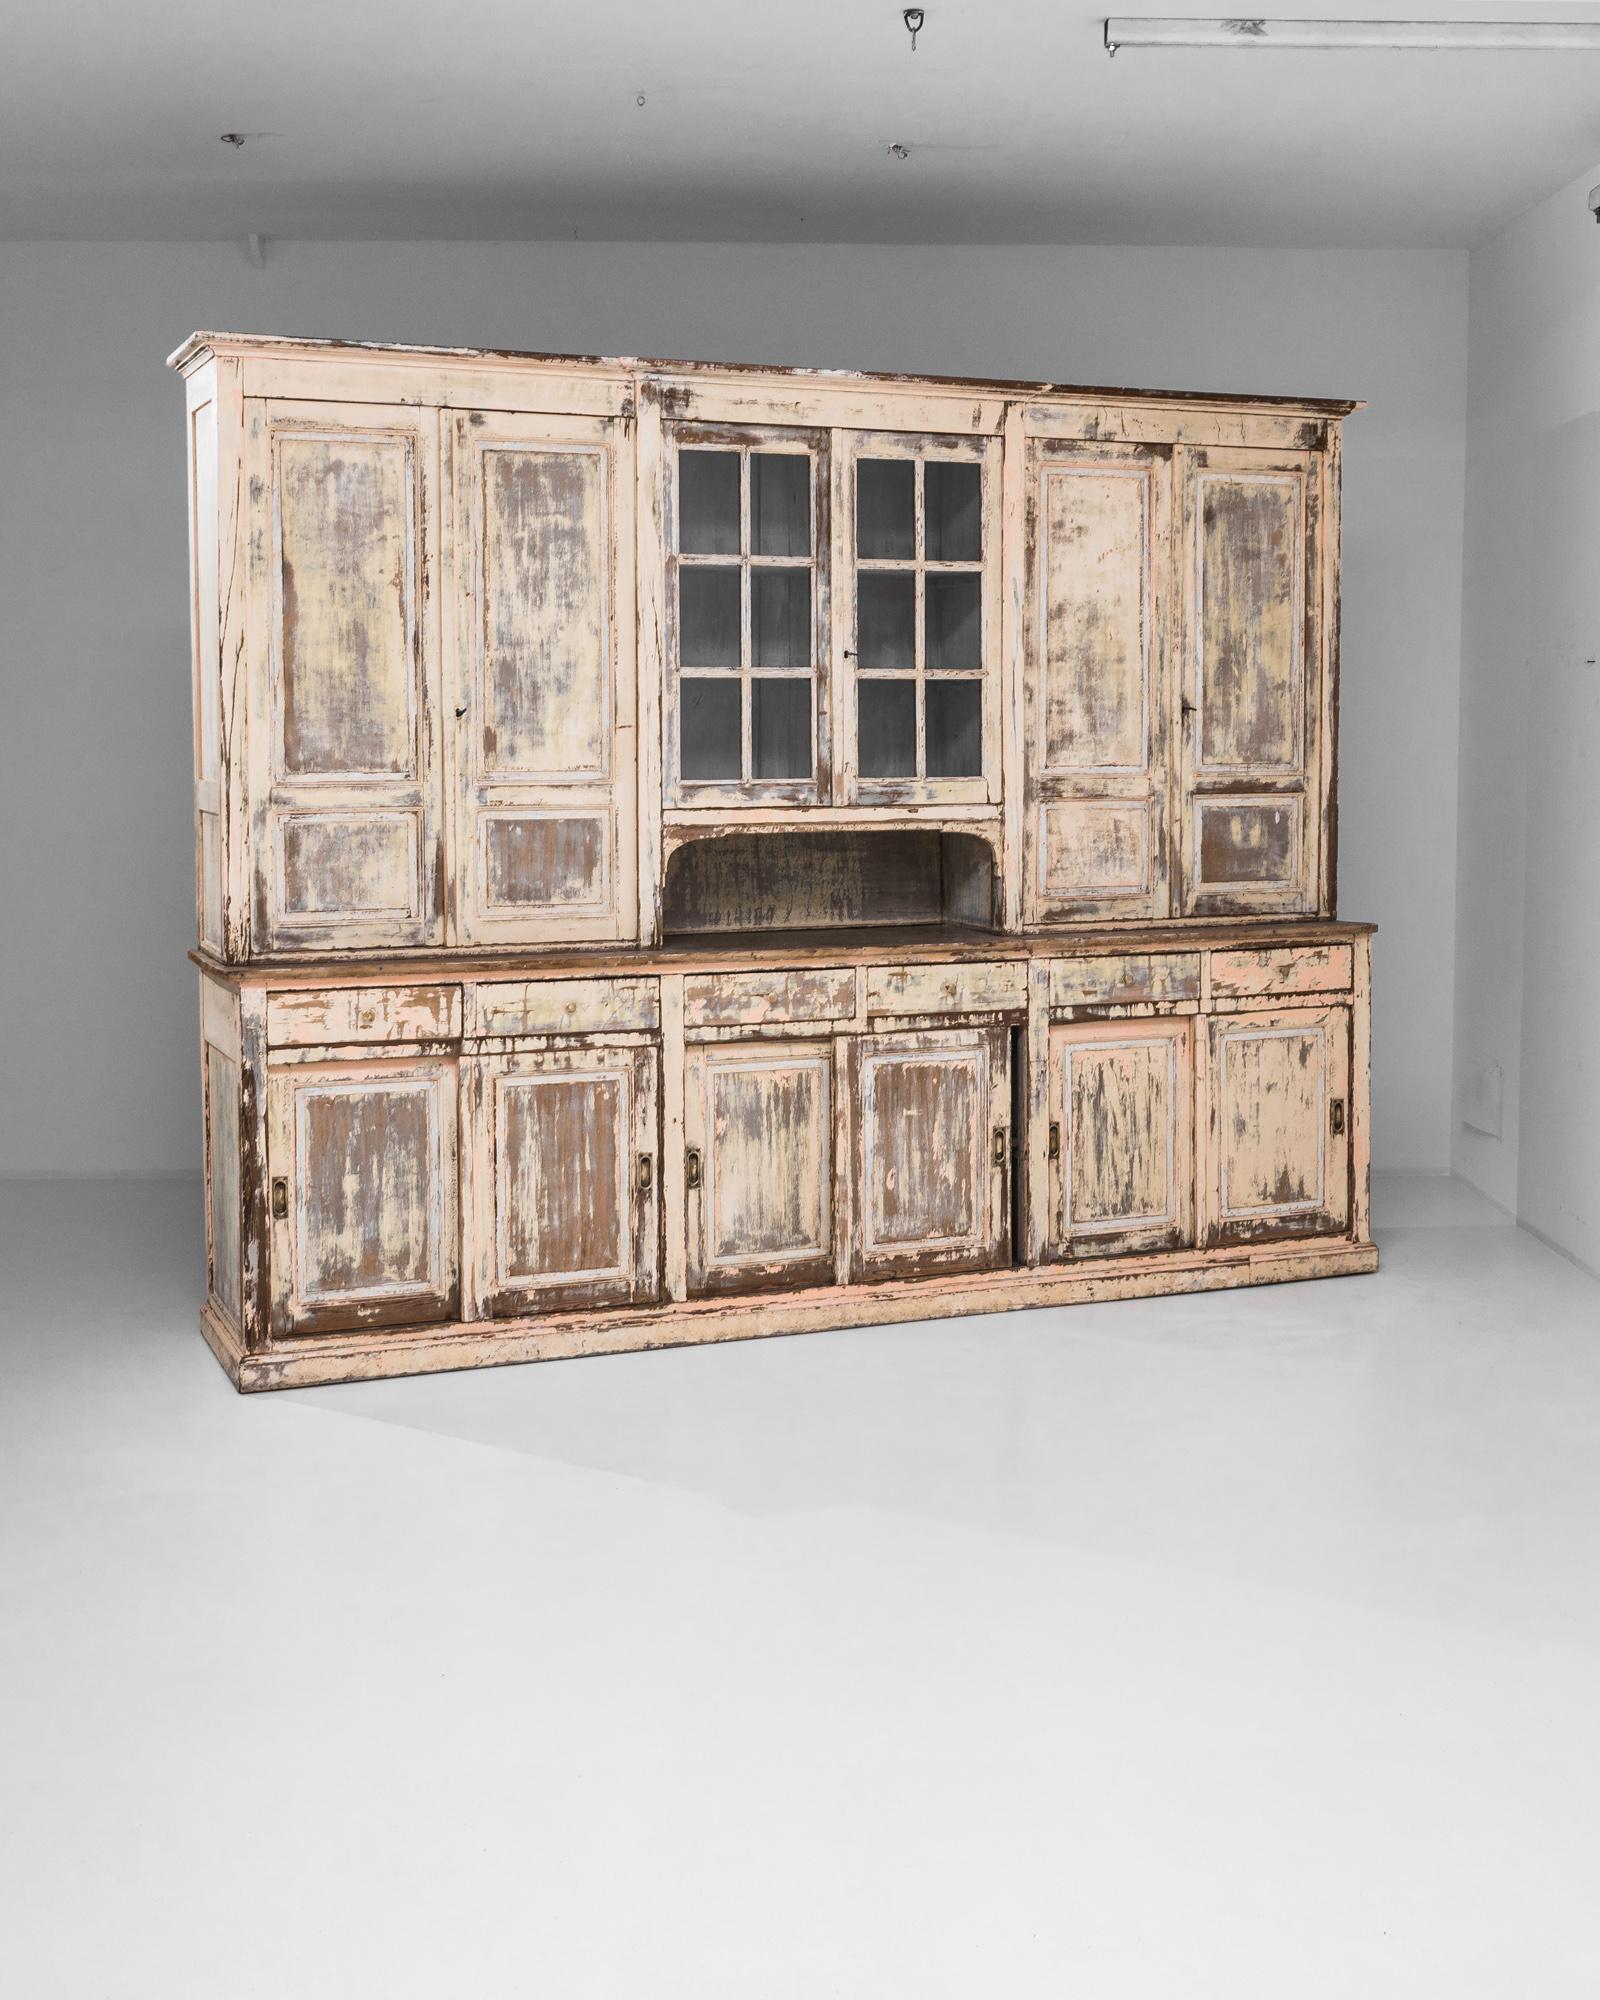 A wooden vitrine from France, produced circa 1900. A massive vitrine, standing nearly eight feet tall and stretching to a width of ten feet, this white patinated antique maintains a delicate grace: a double door display cabinet over an arched cubby